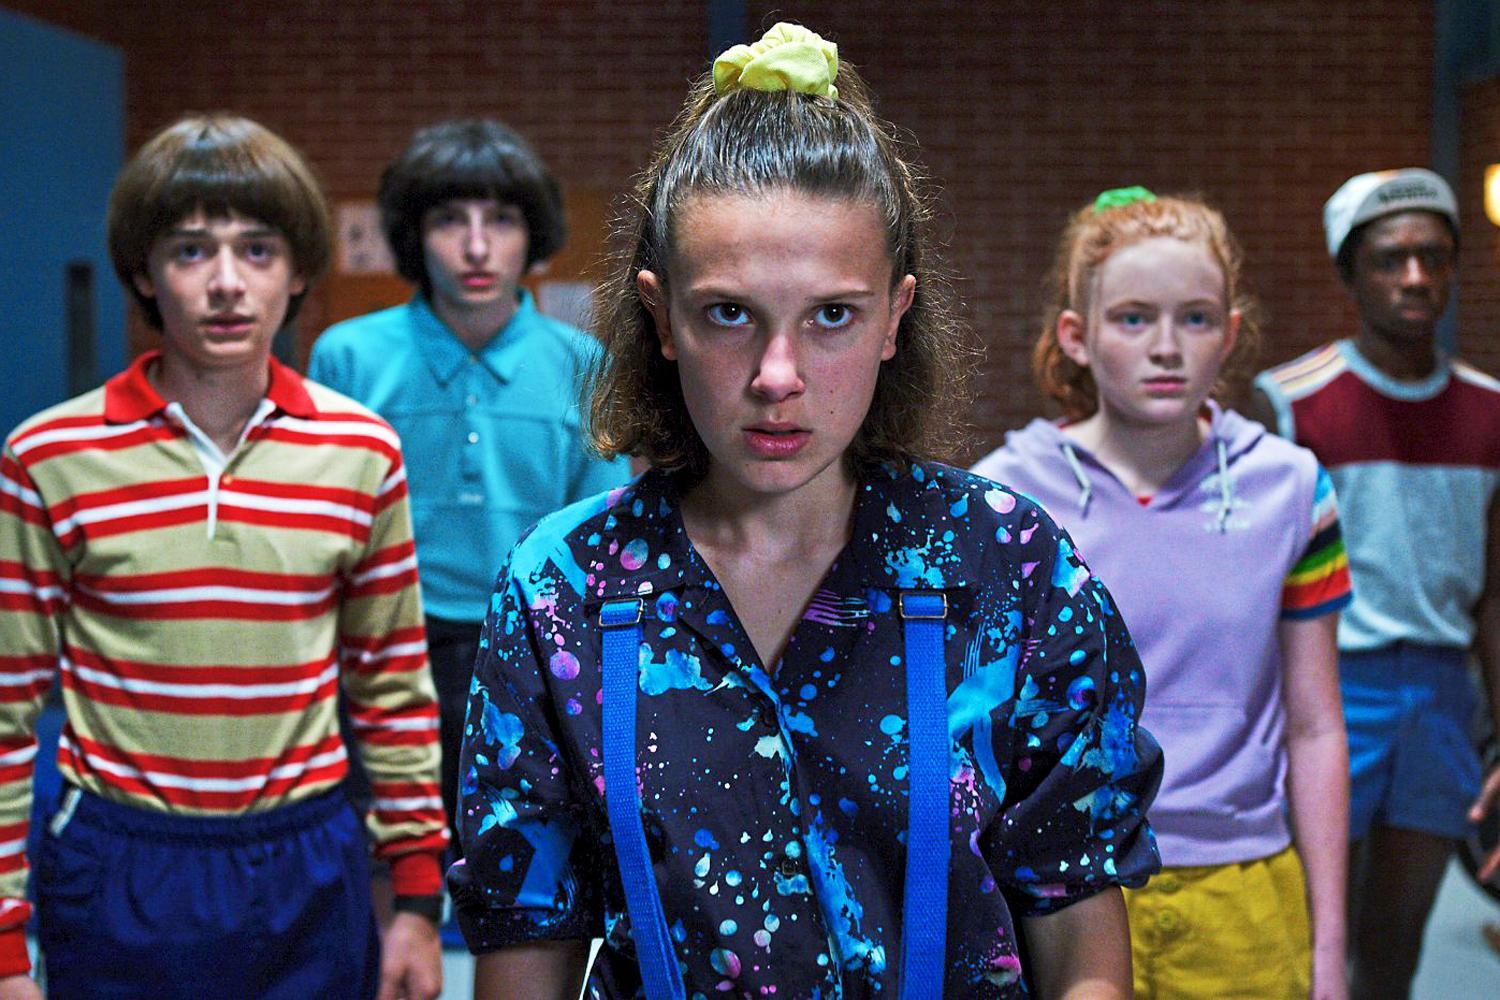 Stranger Things 4: From the cast to probable release date